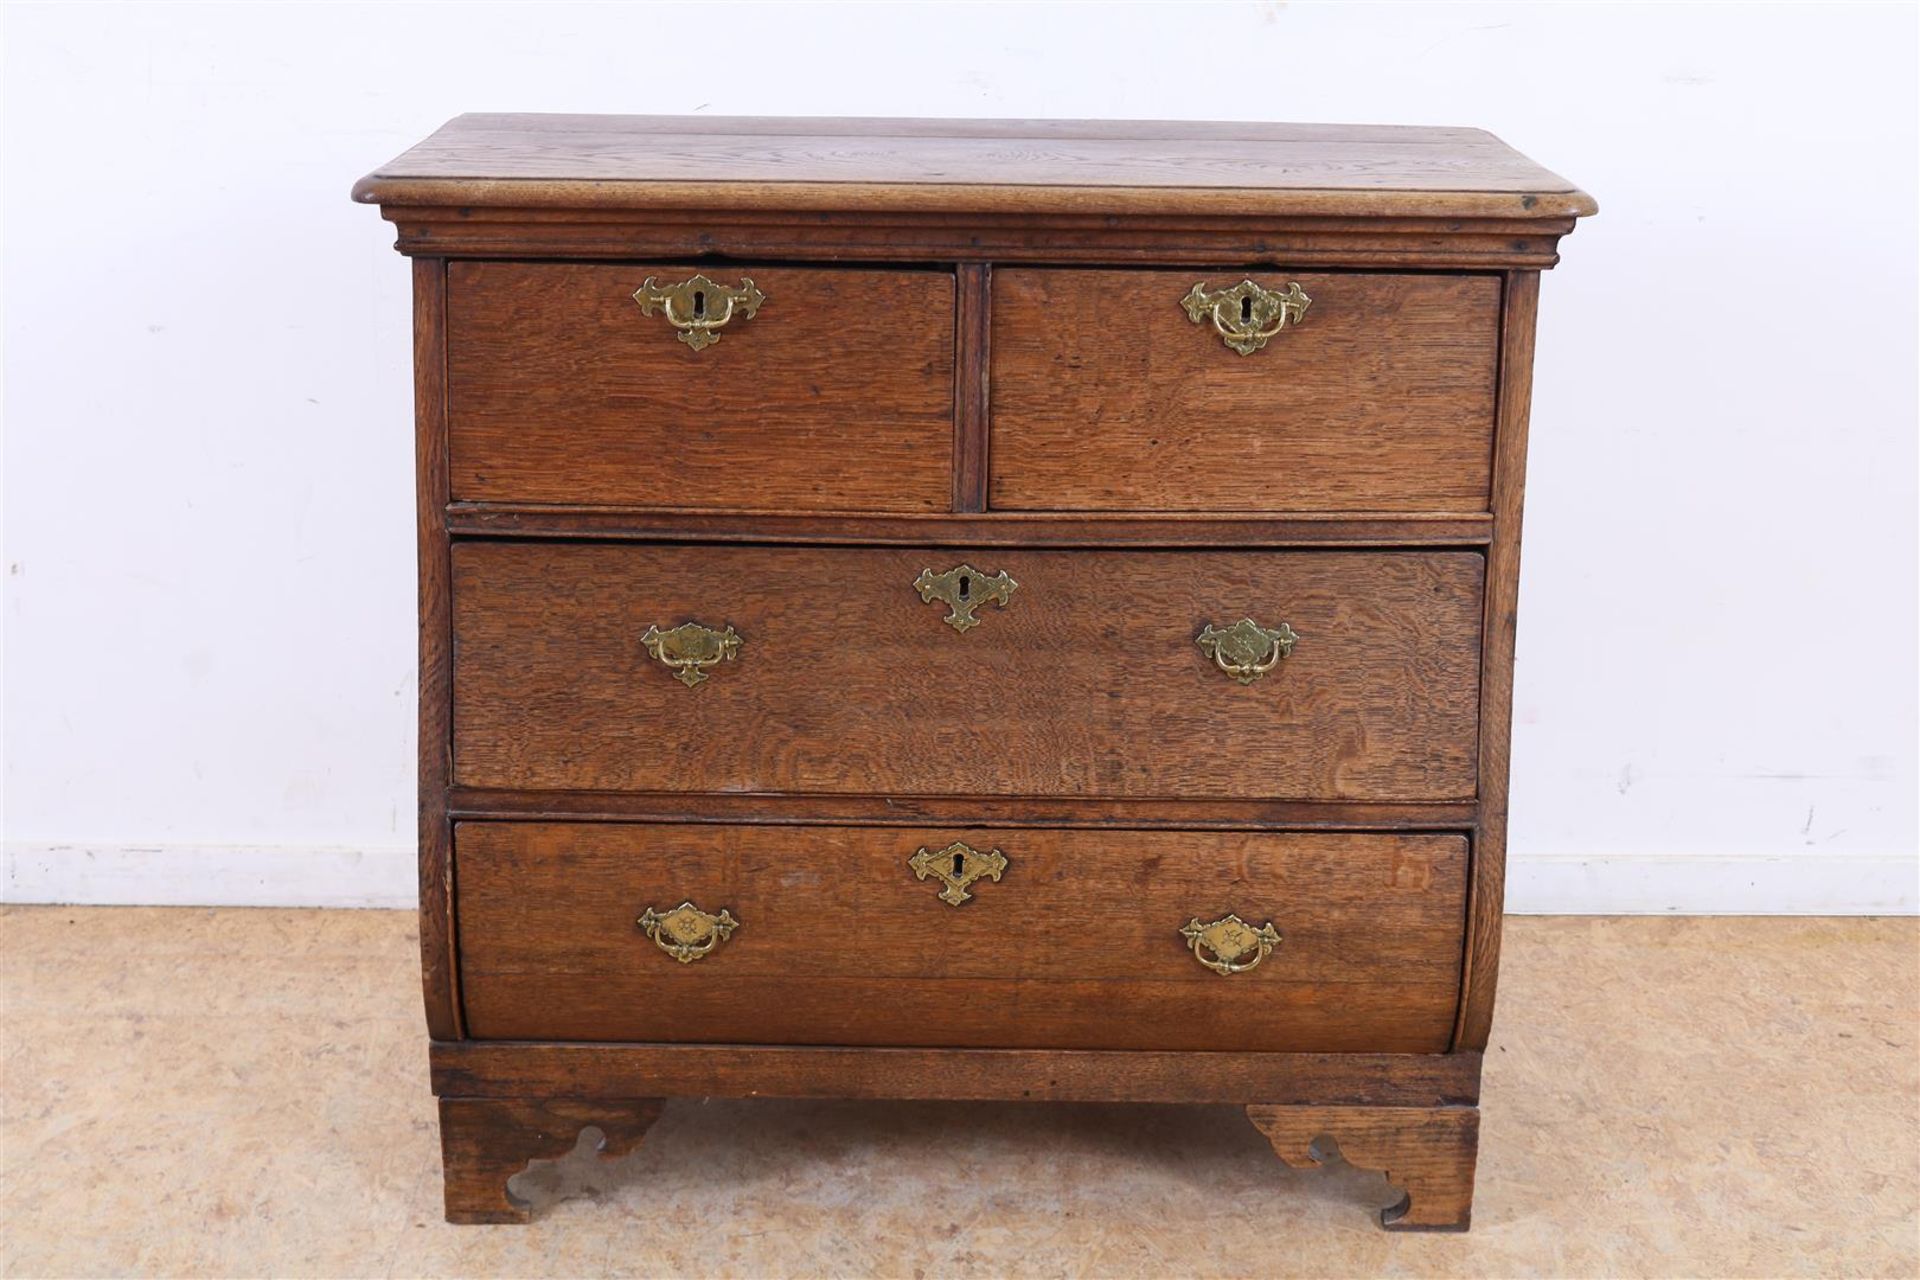 Oak commode with 4 drawers and bronze fittings